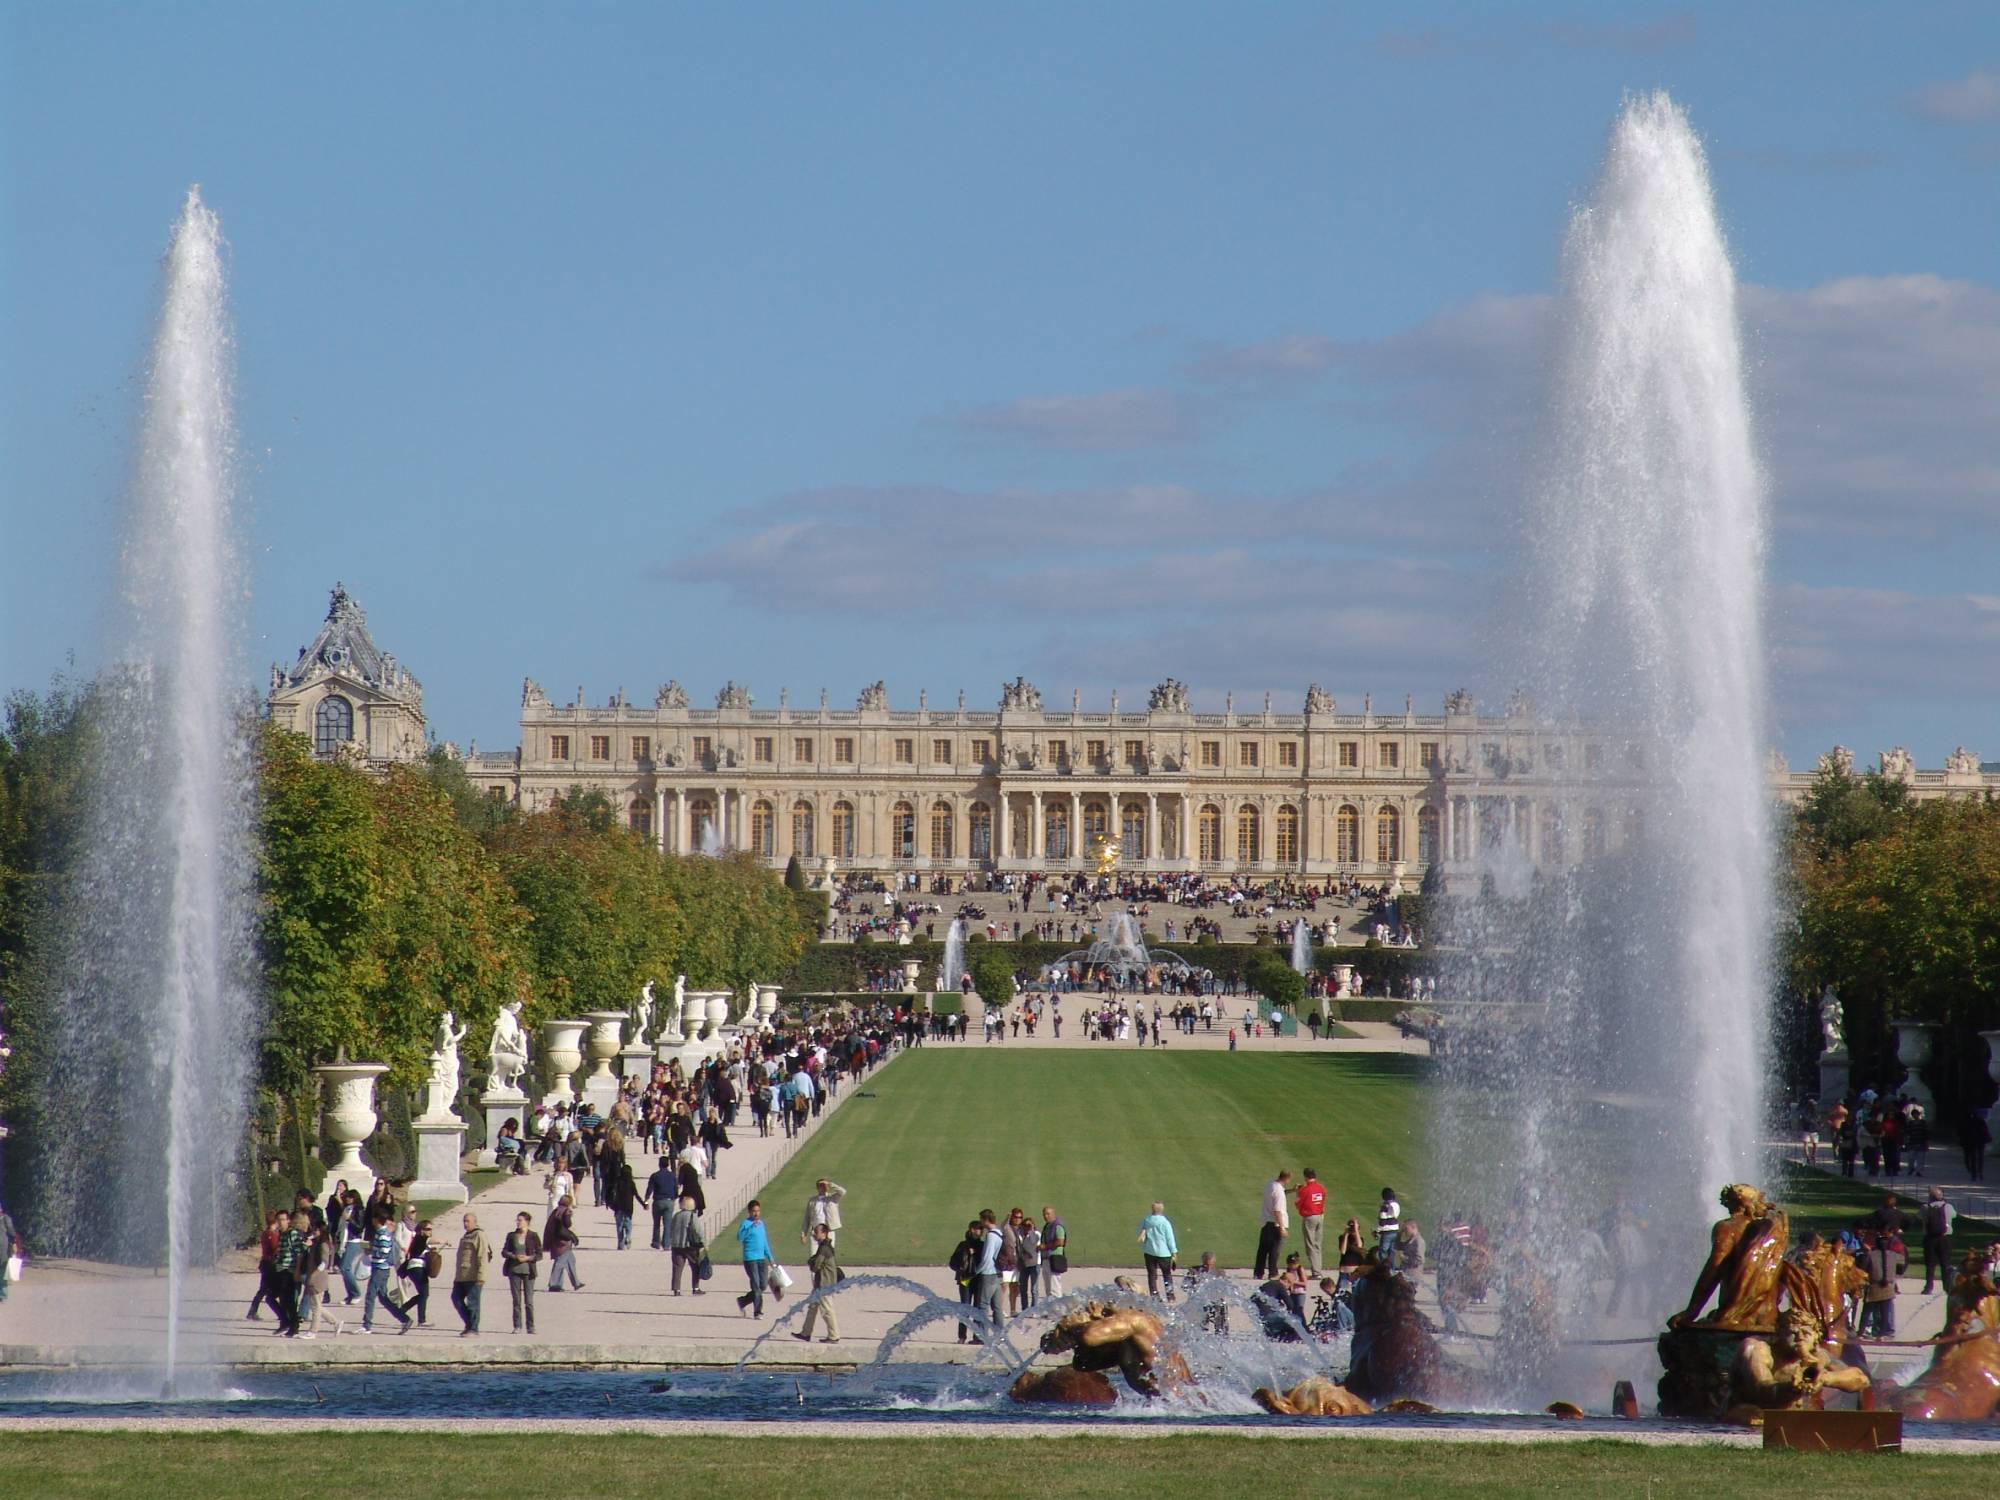 Visit the Palace of Versailles in France | PassPorter.com